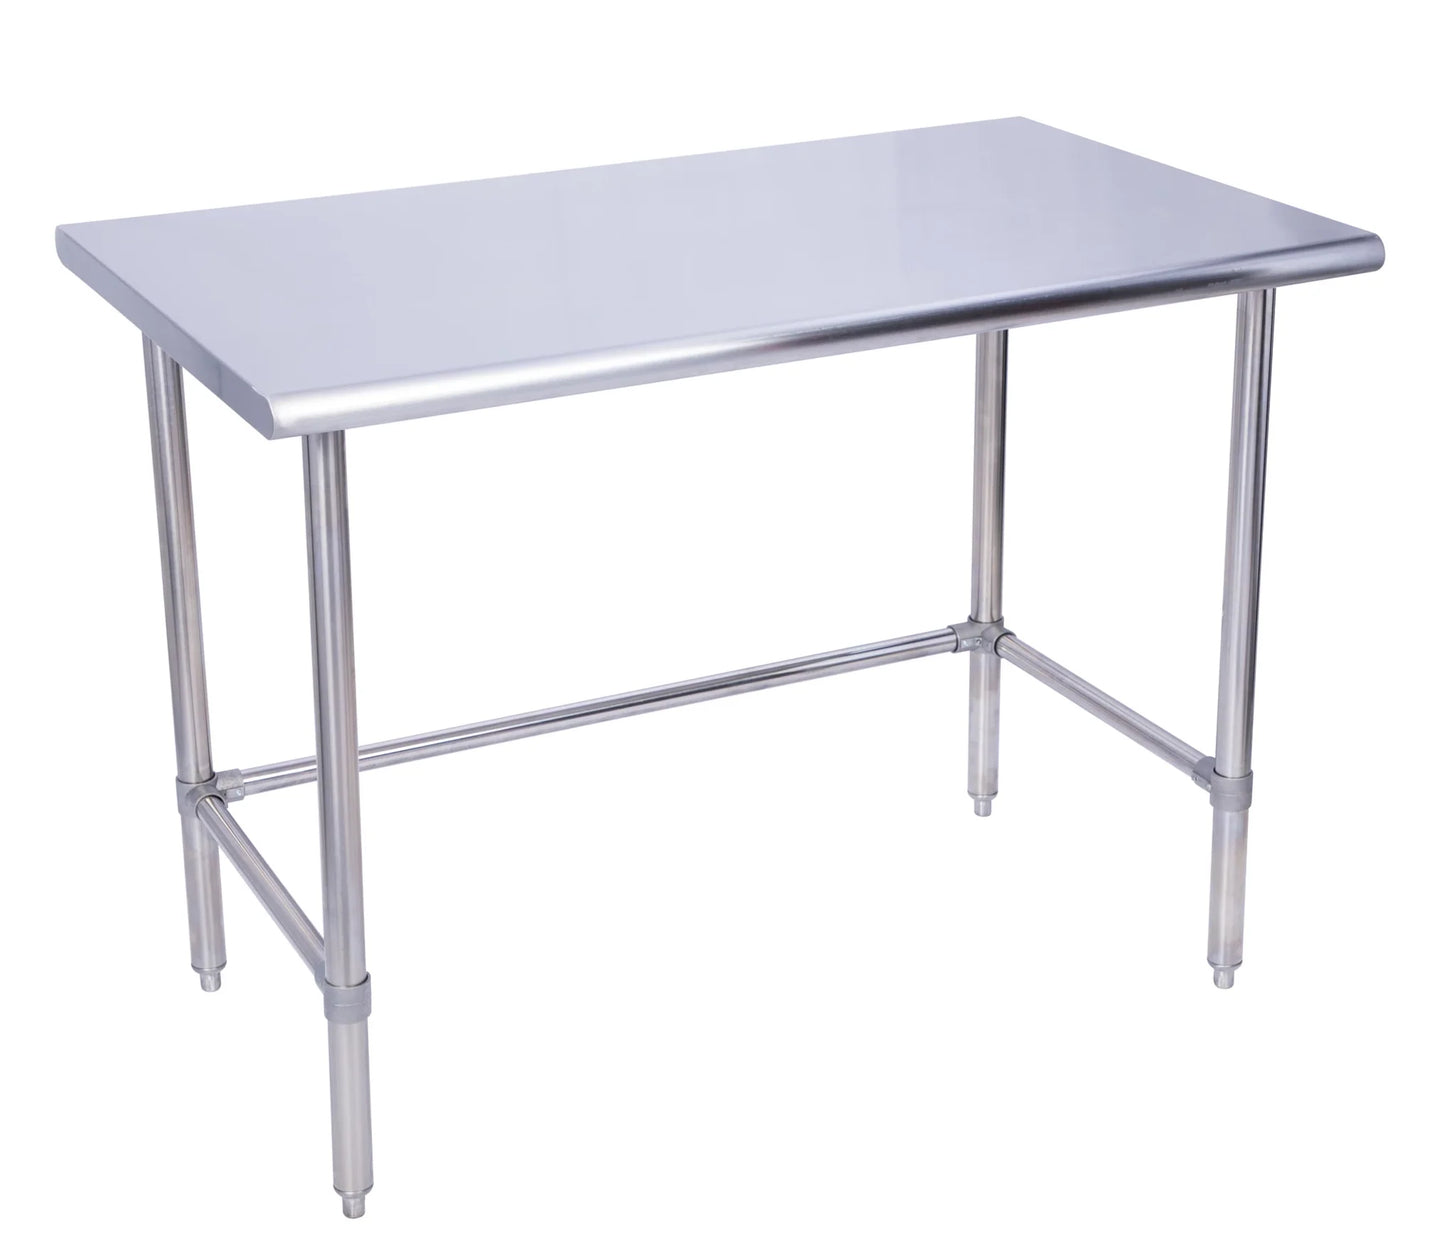 KCS WSCB-2430 24" x 30" Stainless Steel Work Table With Cross Bar